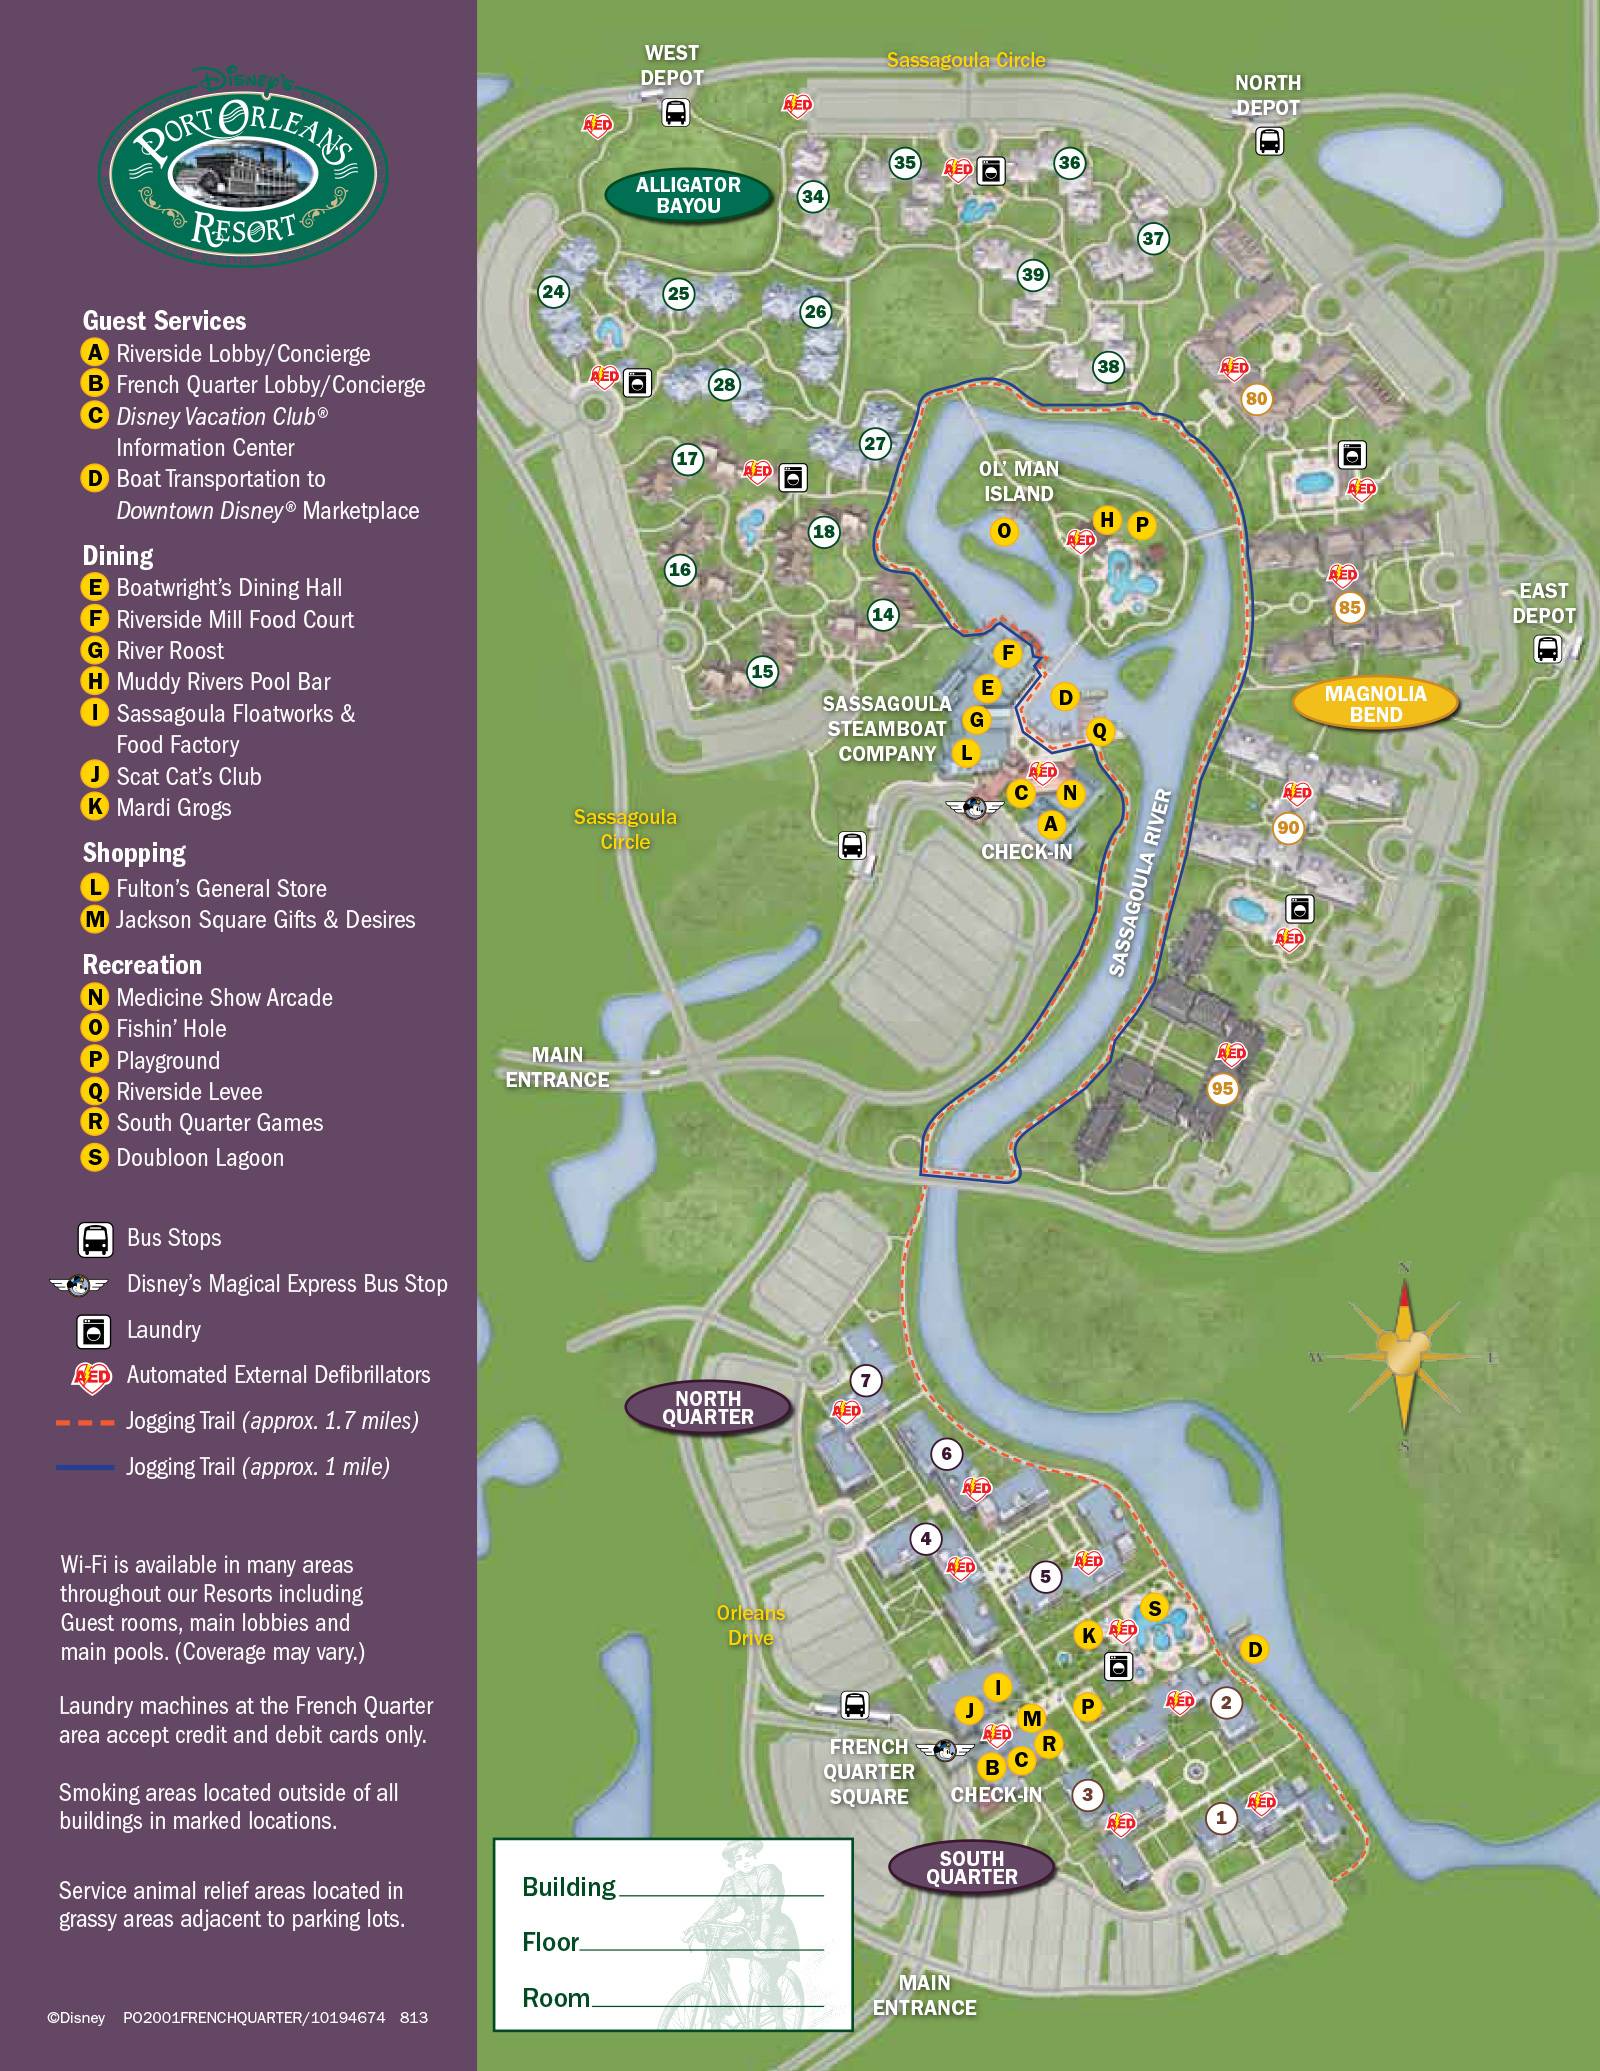 2013 Port Orleans French Quarter guide map